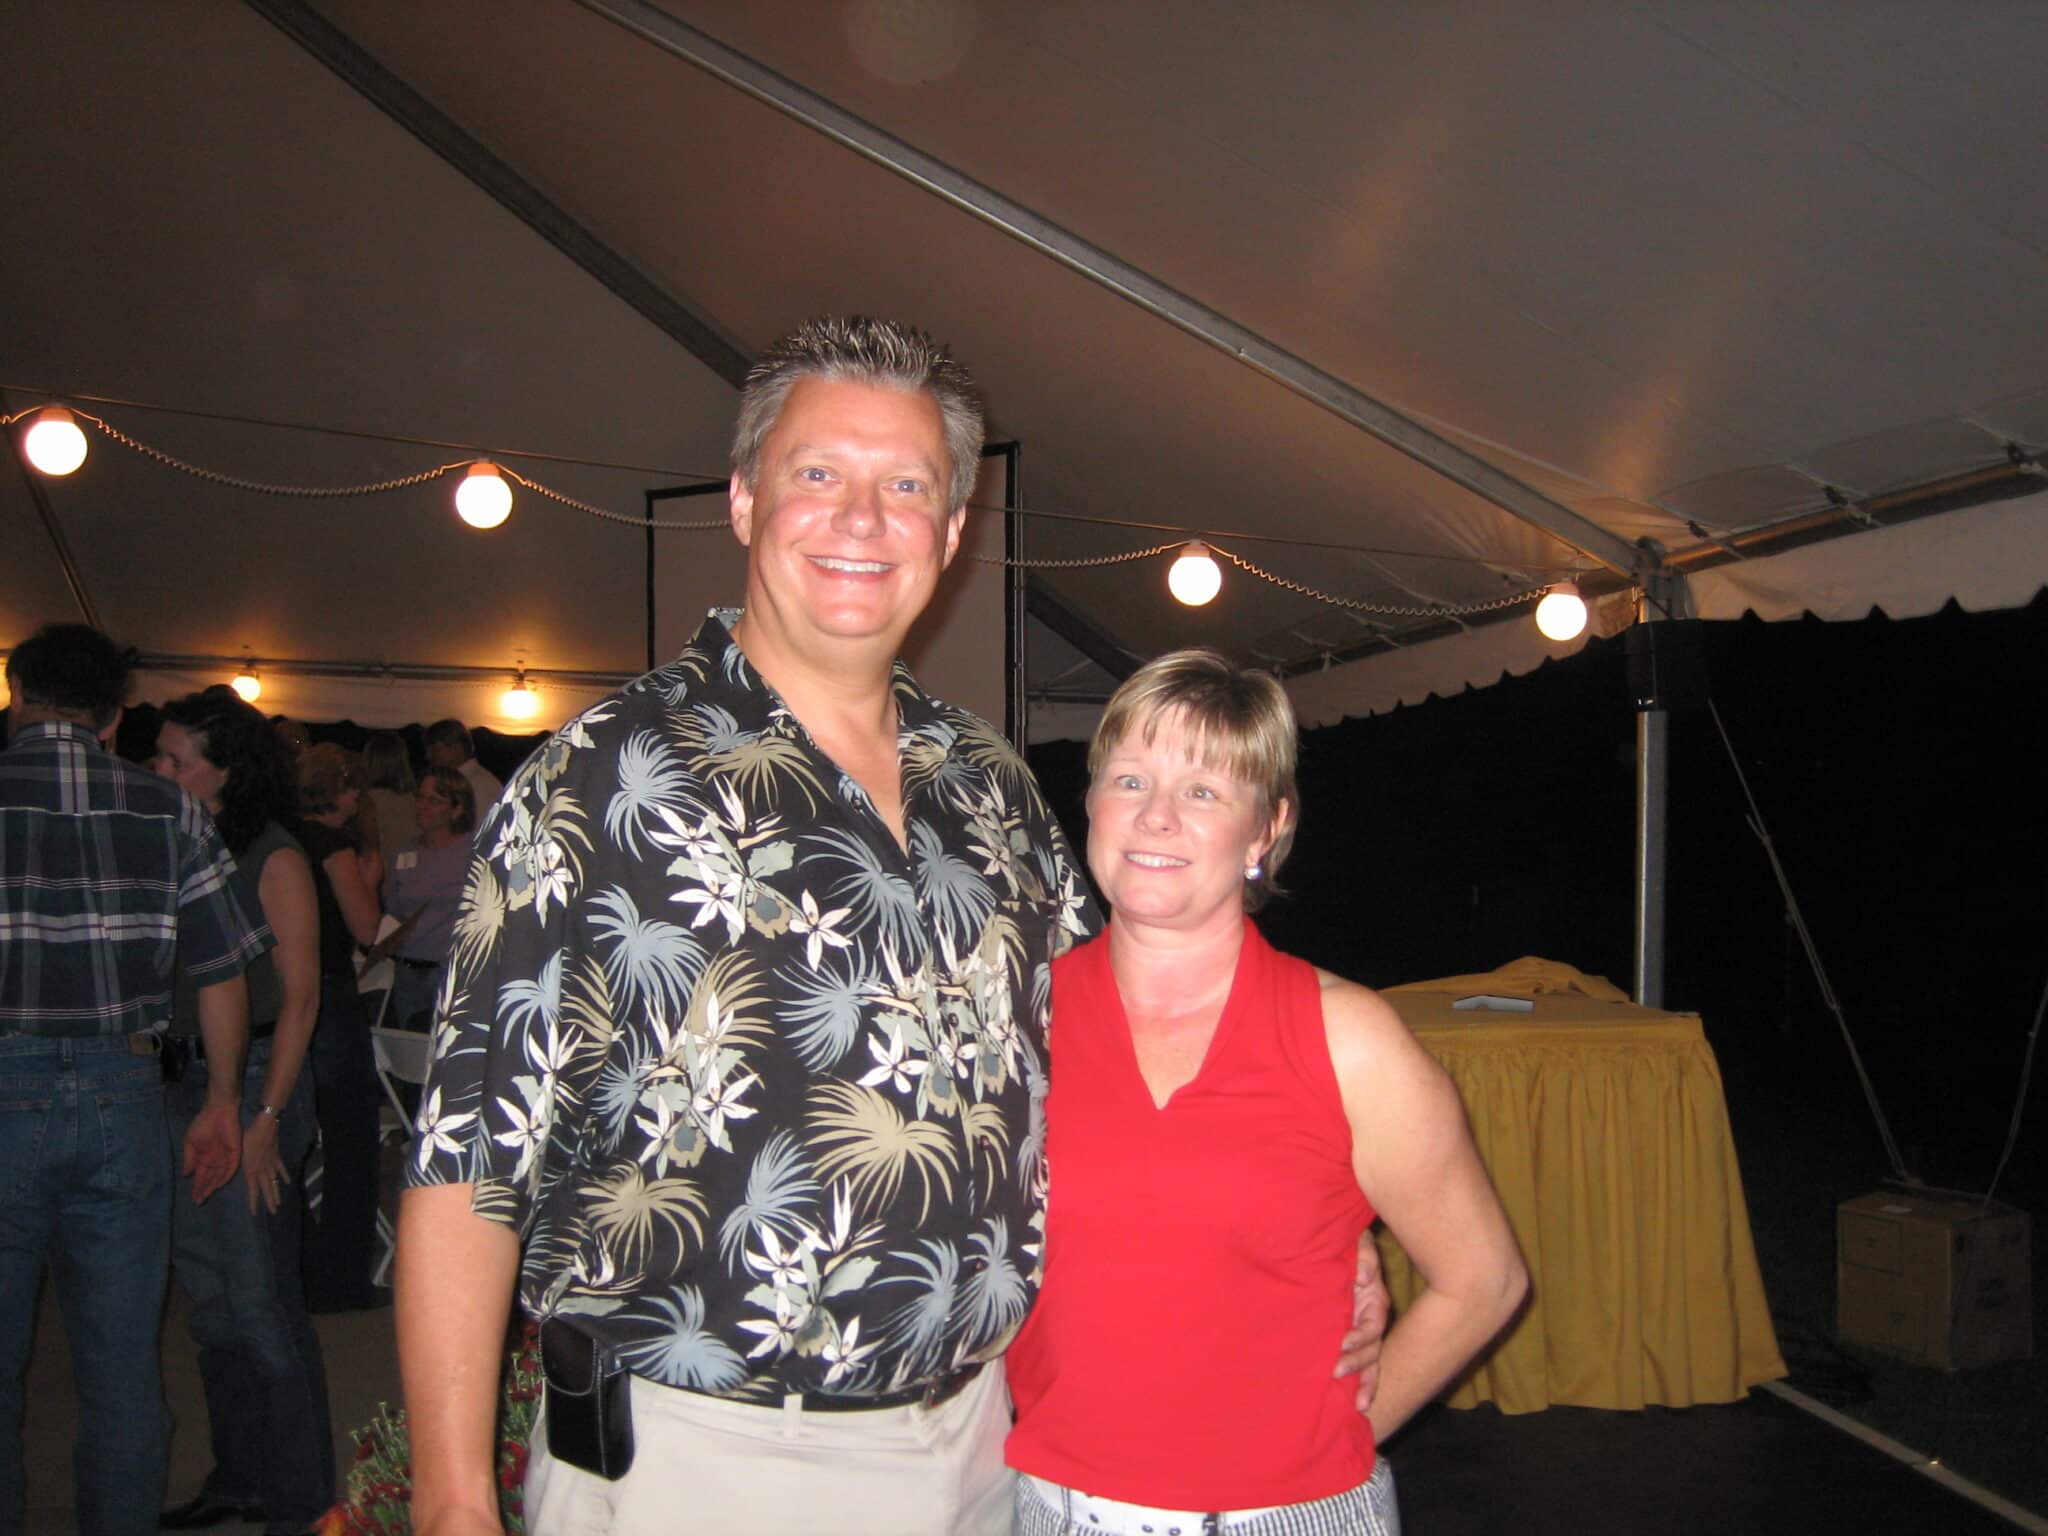 Susan and Rob Bowman smiling together at a tented event.